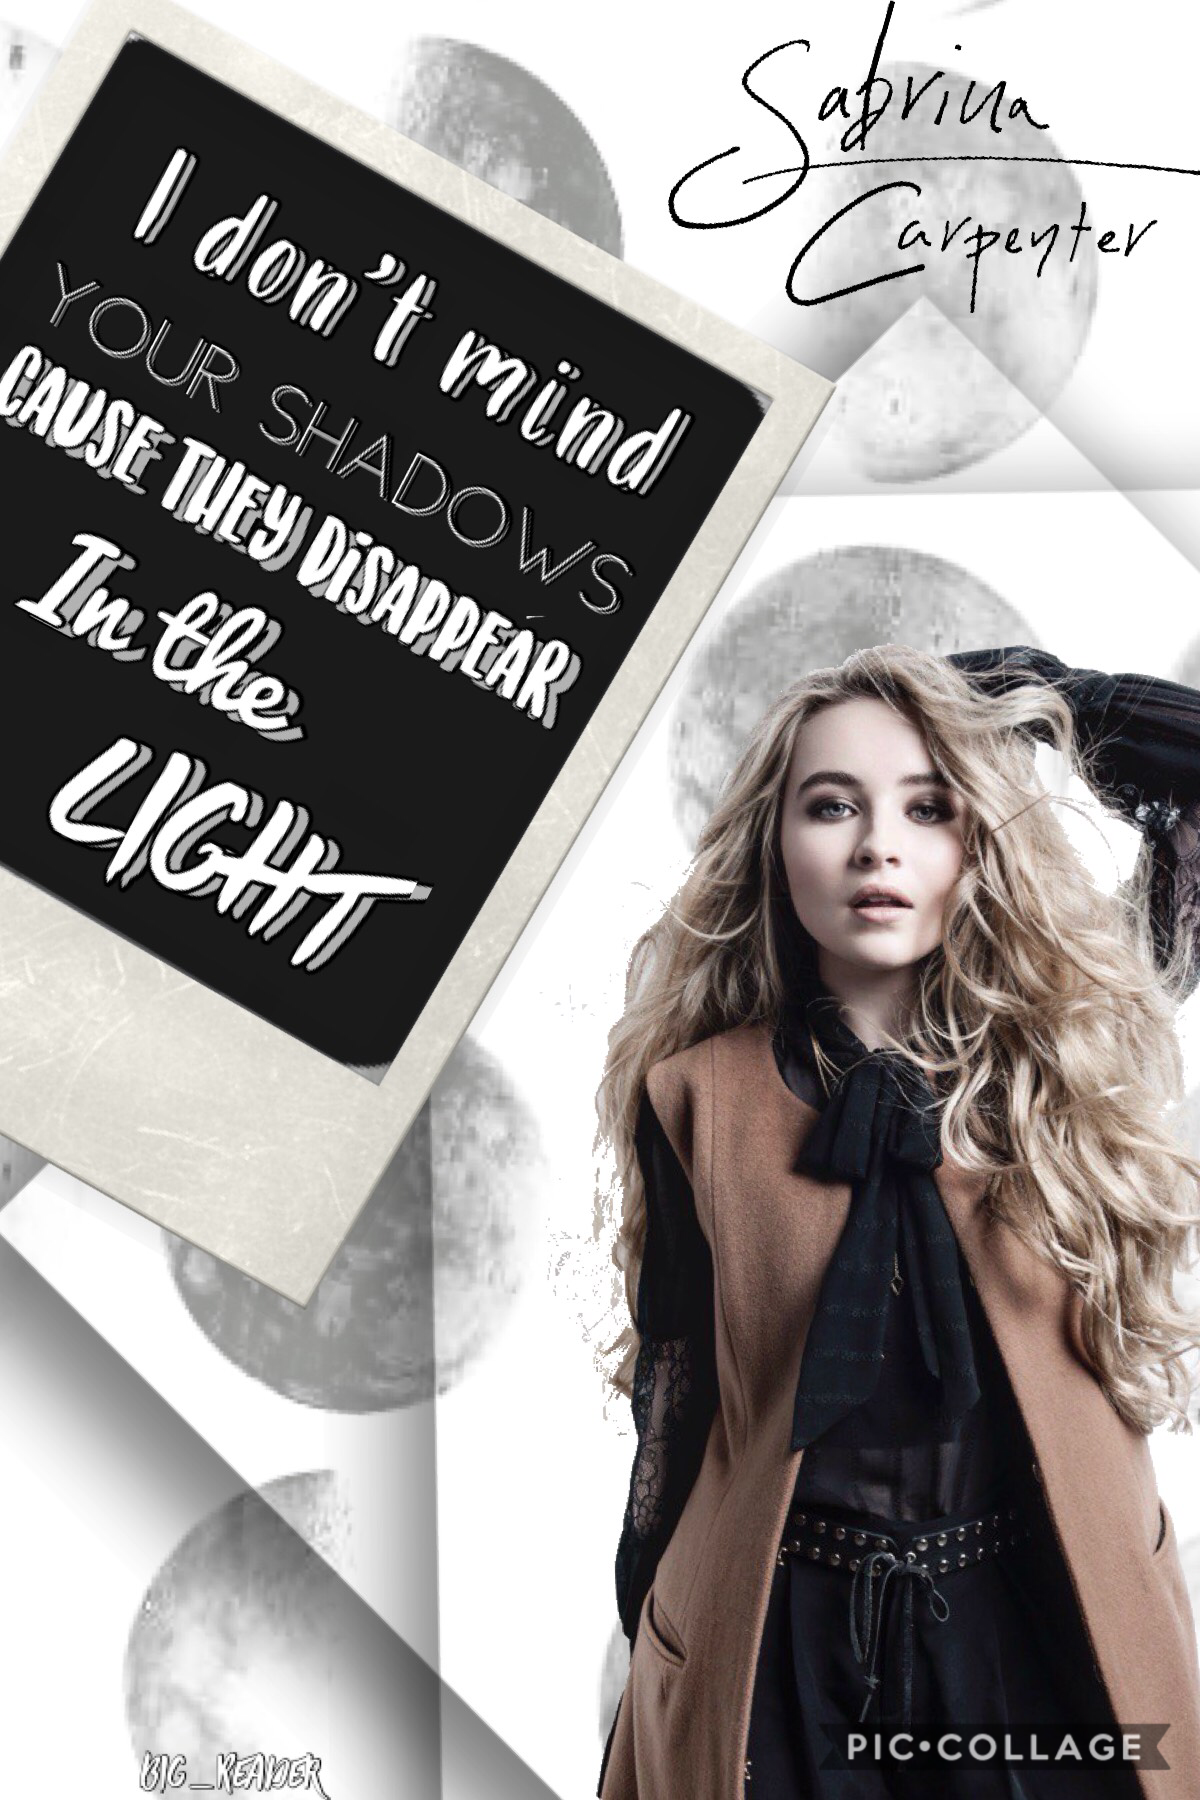 💡“Shadows” by Sabrina Carpenter💡Tap!
Shoutout to MarvelQueen7, please enter her movie games!! She is amazing! Thank you so much for my recent feature!😆QOTD:what Sabrina Carpenter song to you want to see next?